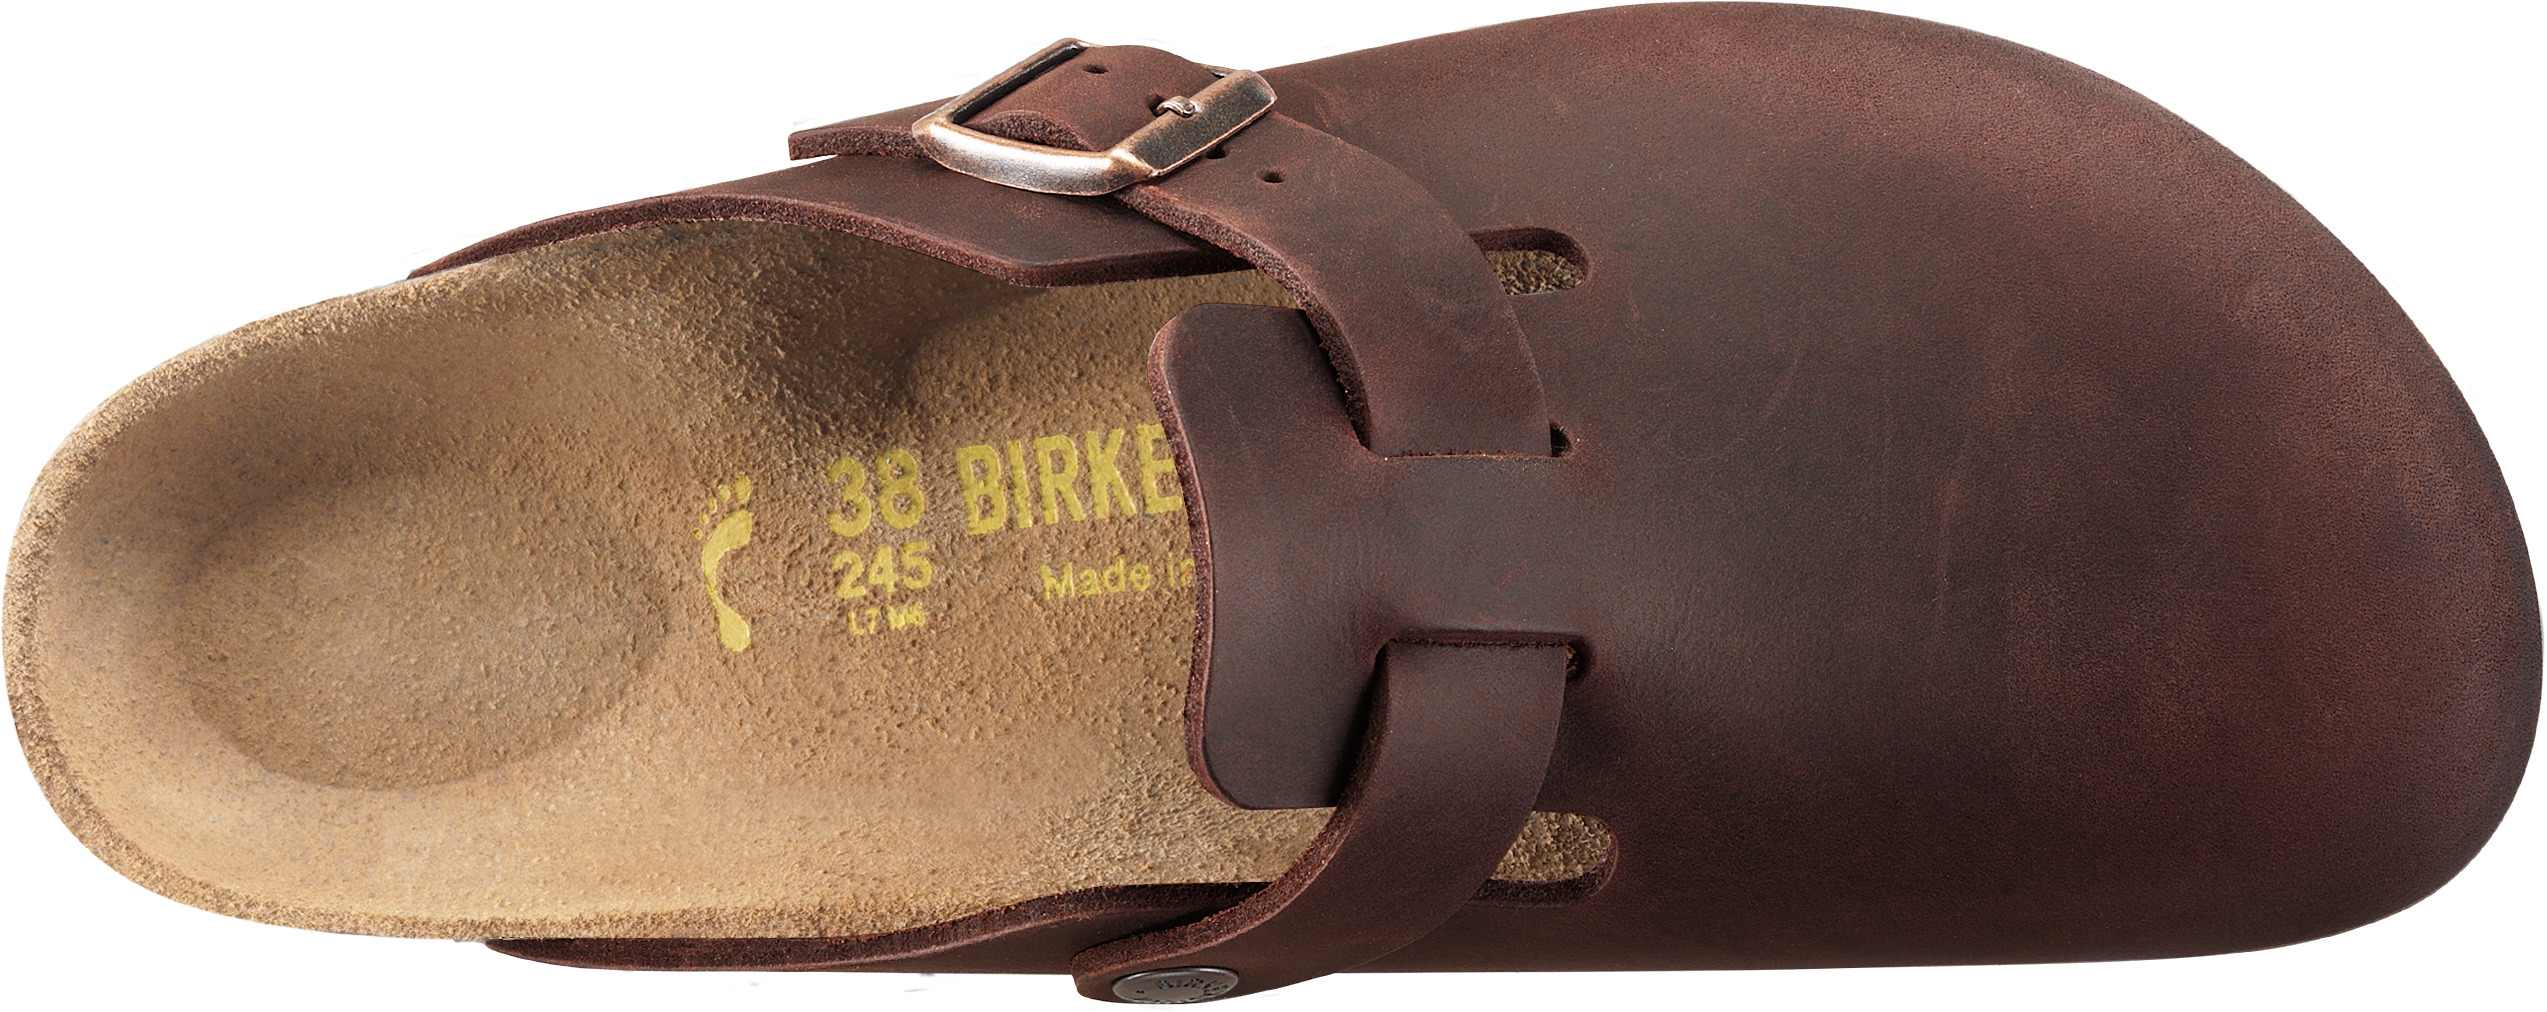 Birkenstock Boston Oiled Ladies Habana Brown Leather Arch Support Buckle Sandals